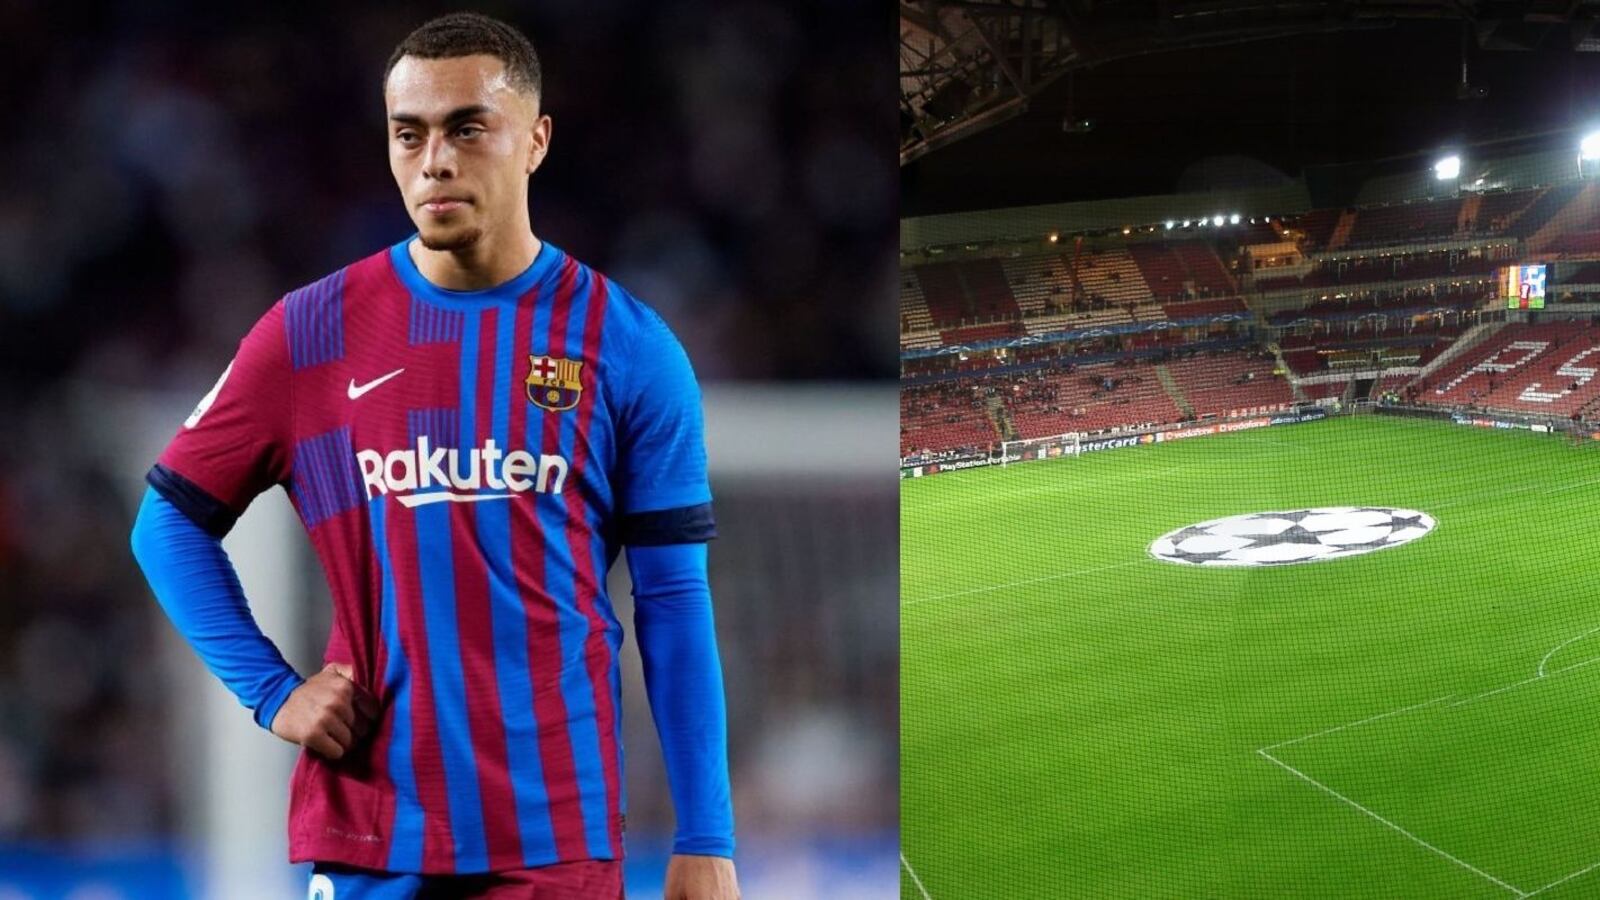 After leaving Barca, the salary that Sergiño Dest will have at PSV